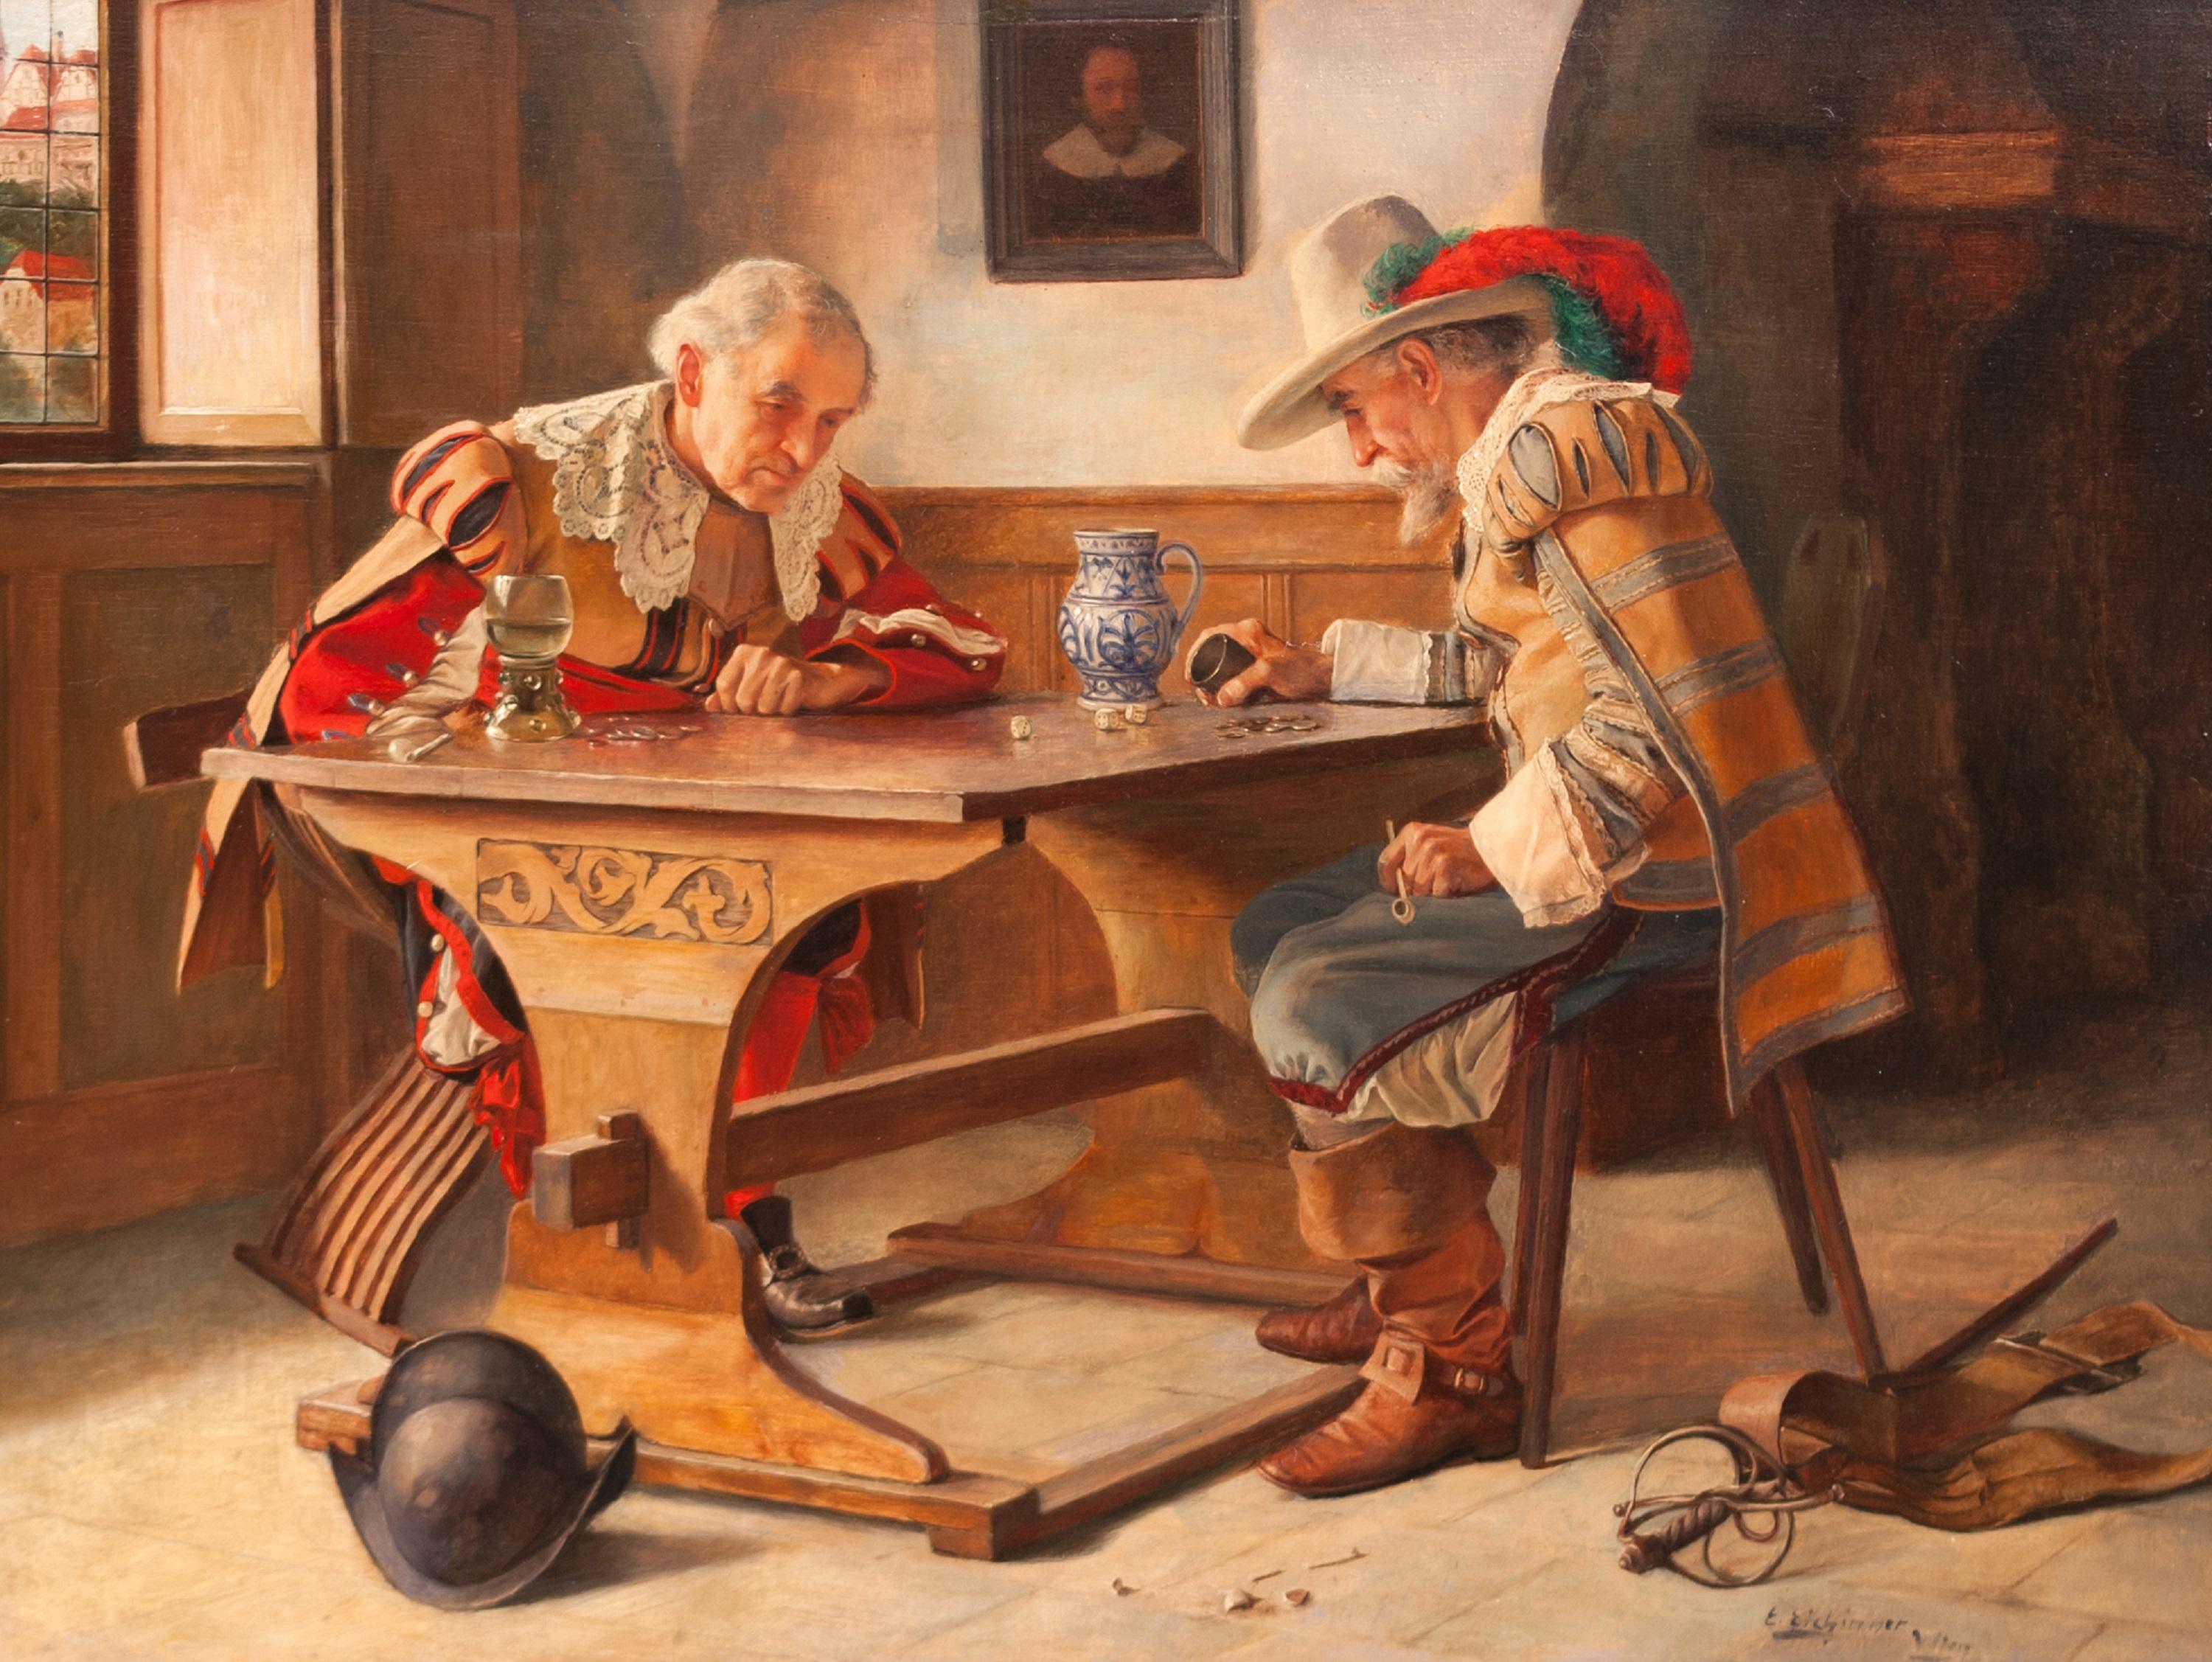 The Dice Players - Painting by Erwin Eichinger